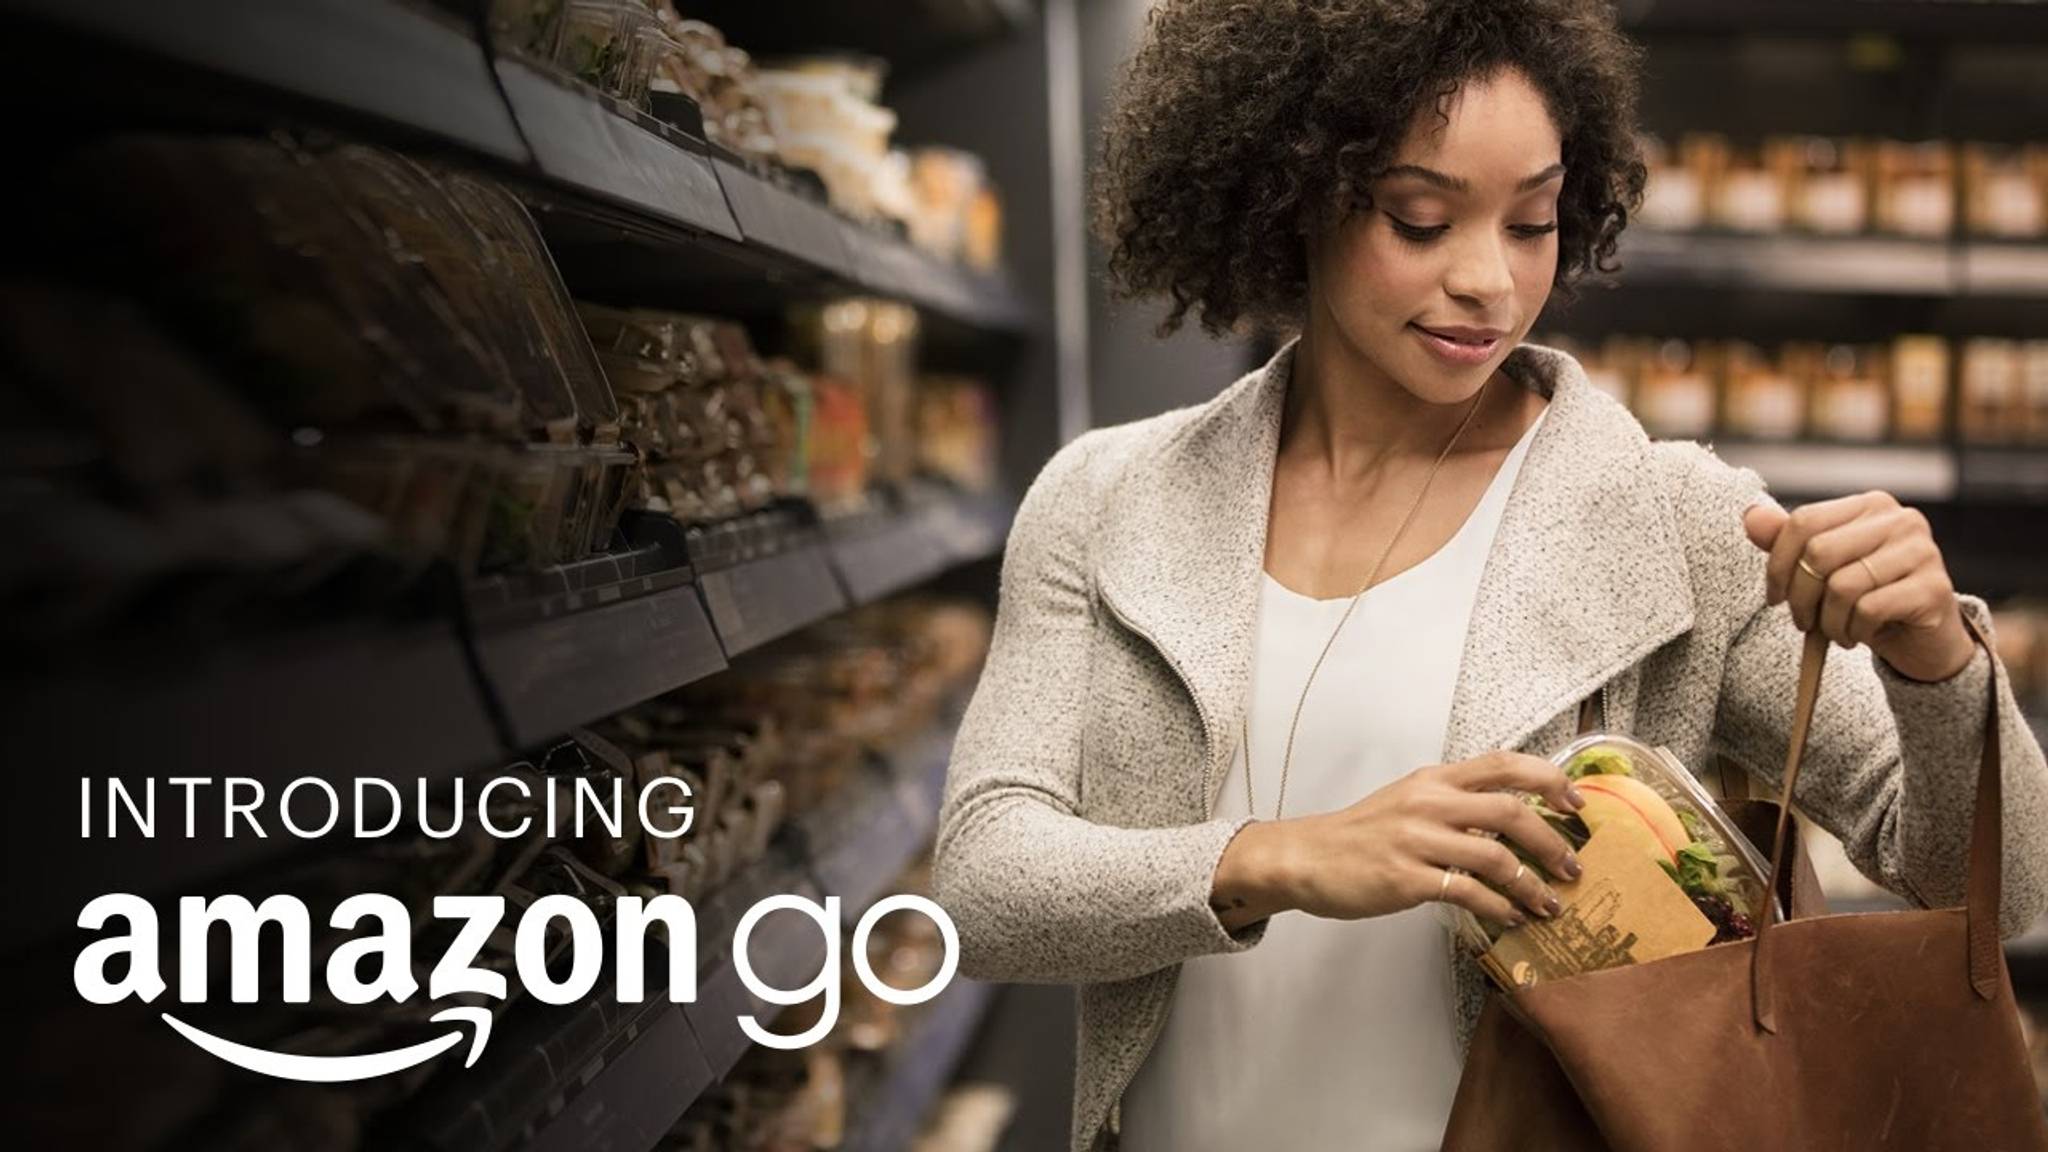 Amazon Go: A New Standard for Automation